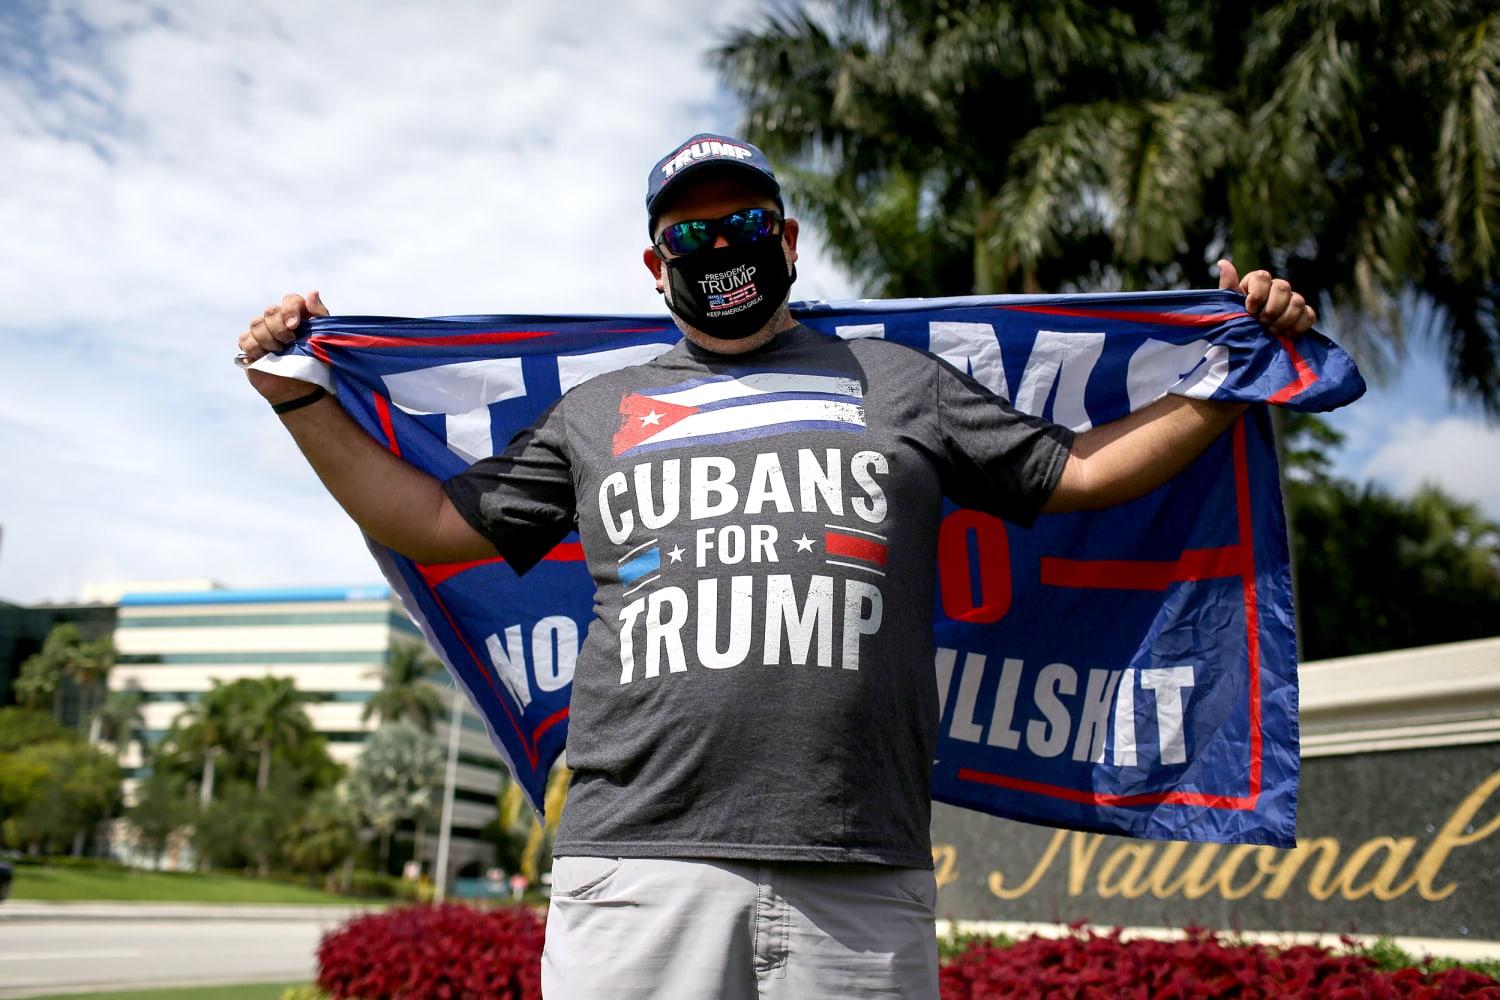 What's behind Trump's gain in Cuban American support?